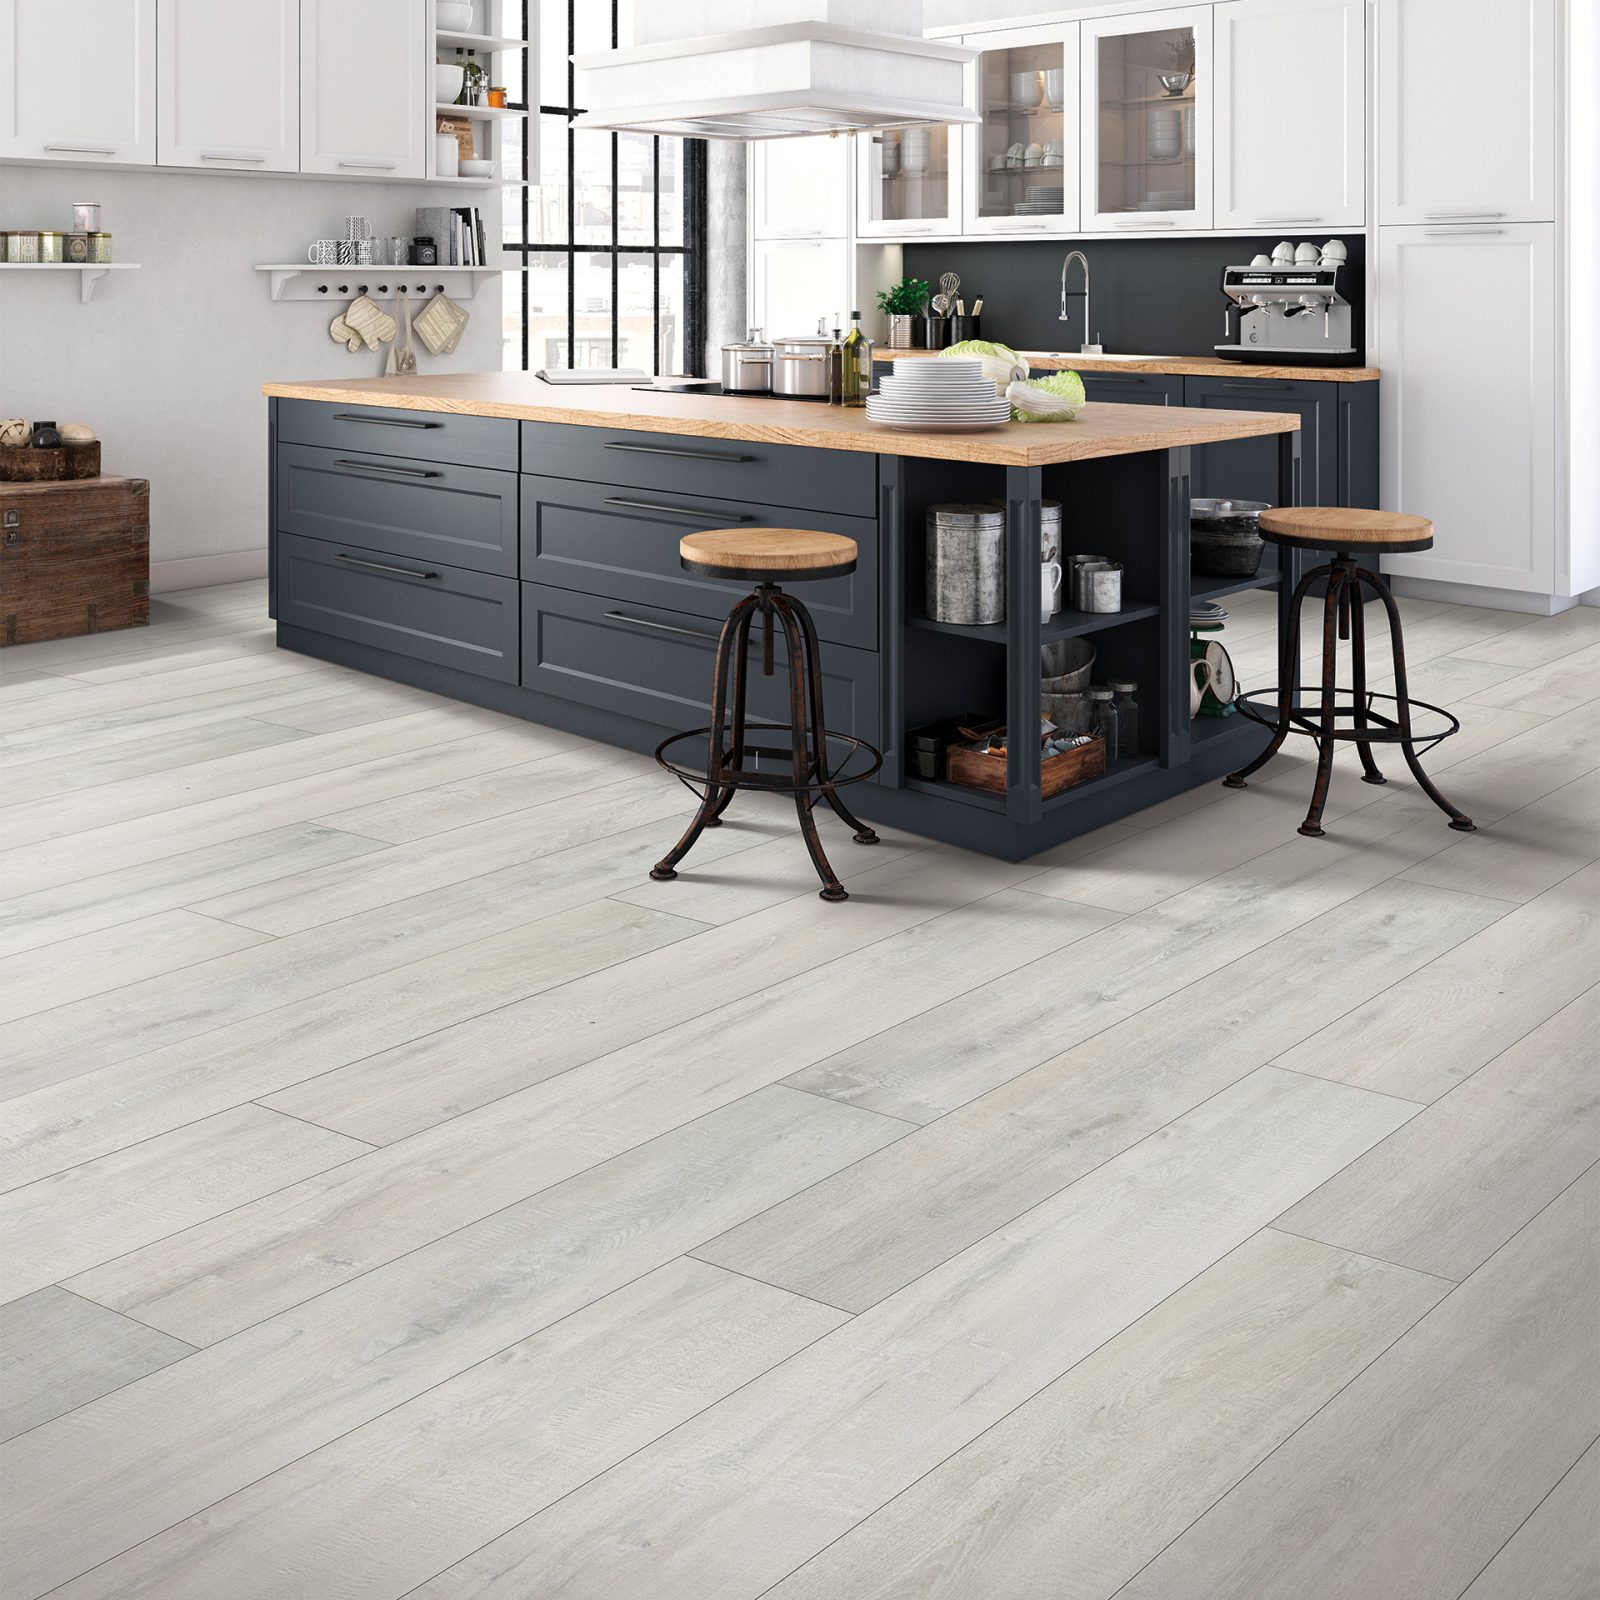 Countertop with Laminate flooring | West River Carpets